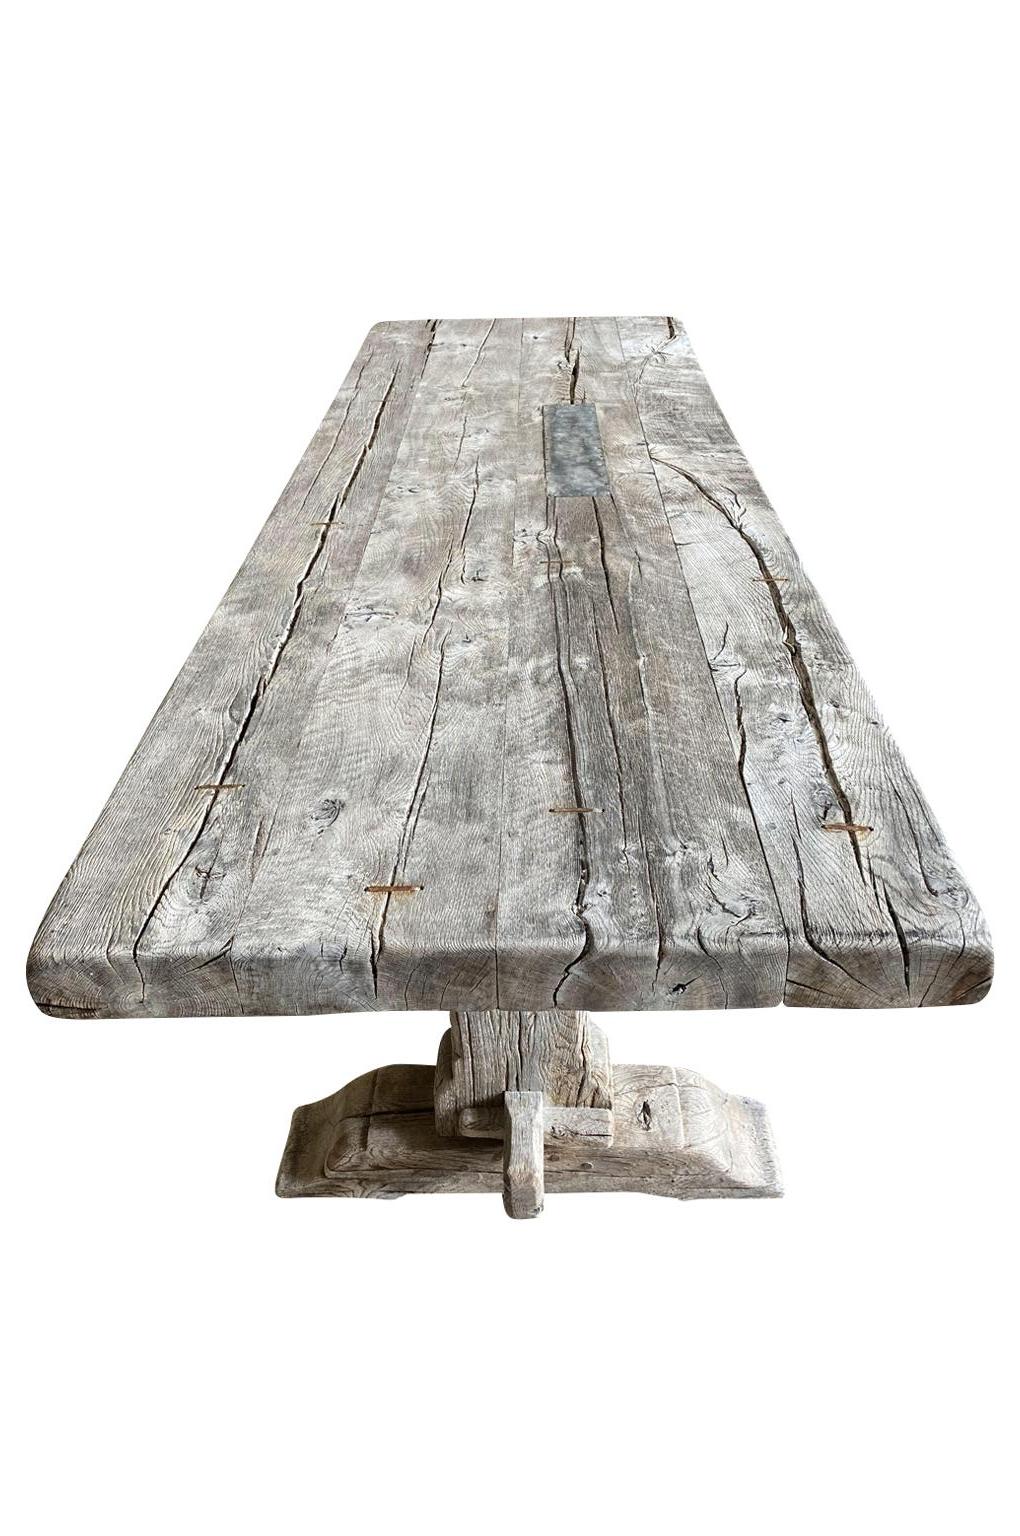 19th Century French Farm Table, Trestle Table 7